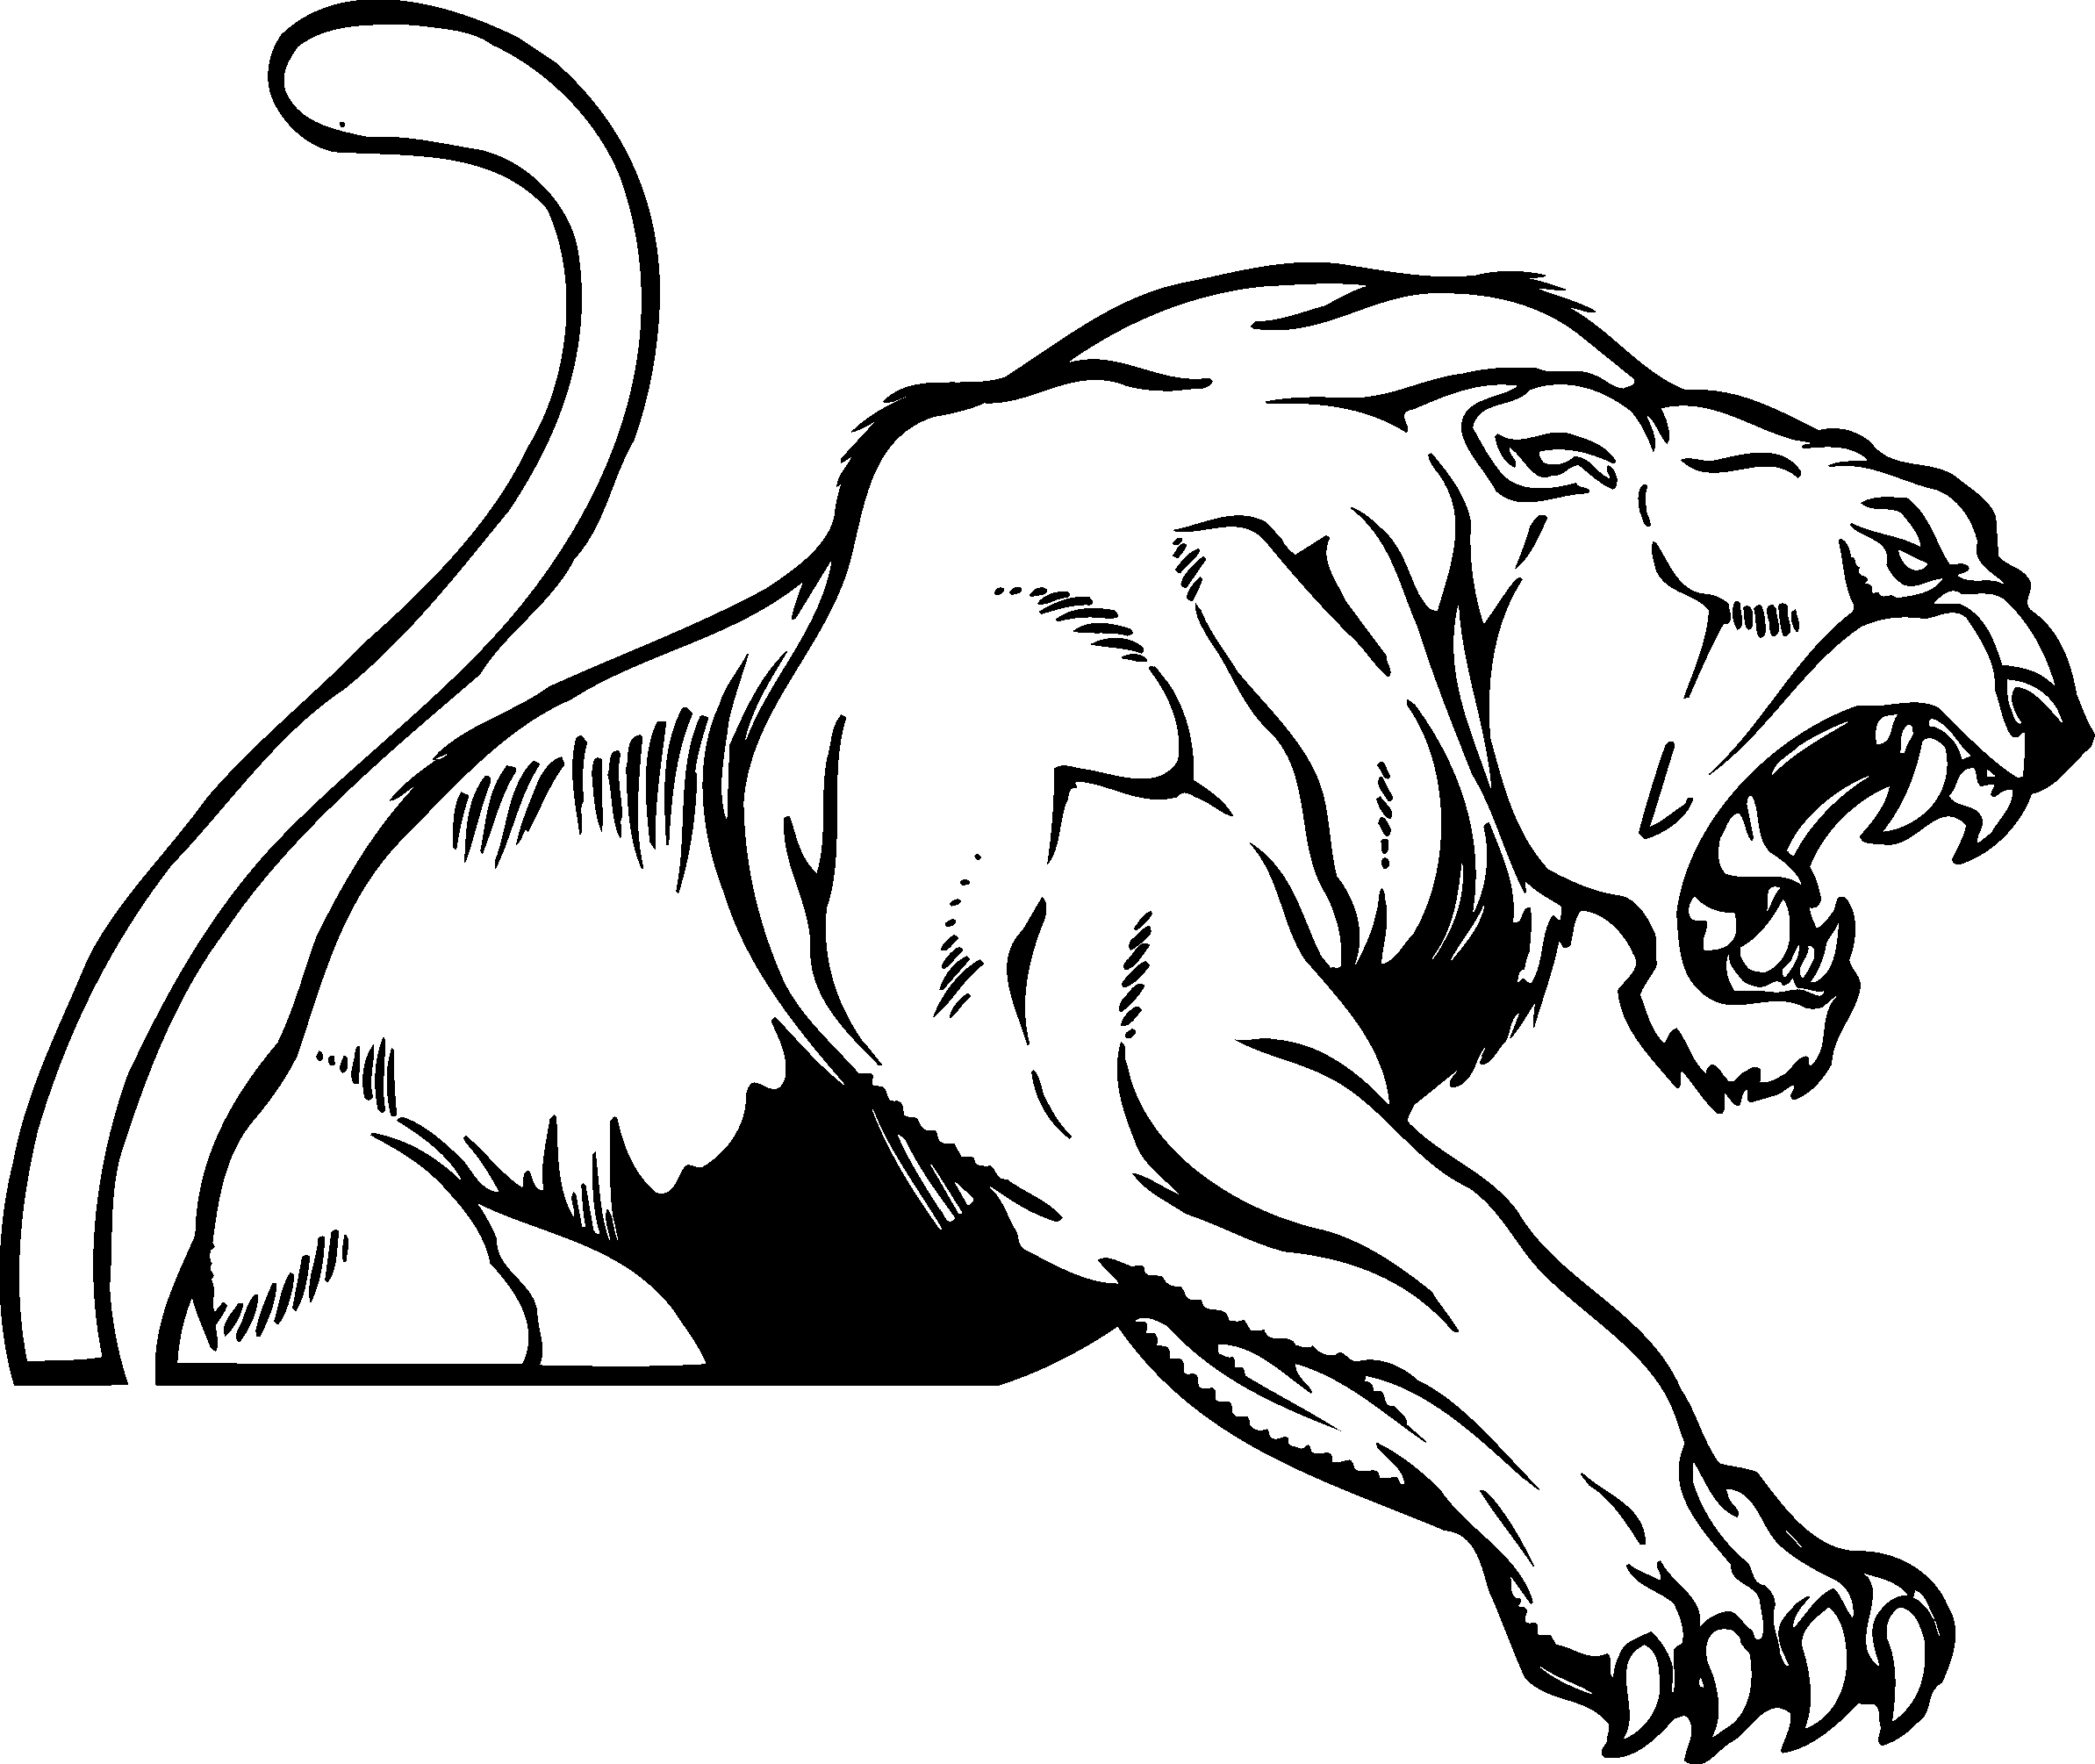 Panther mascot clip art use to create a logo decal